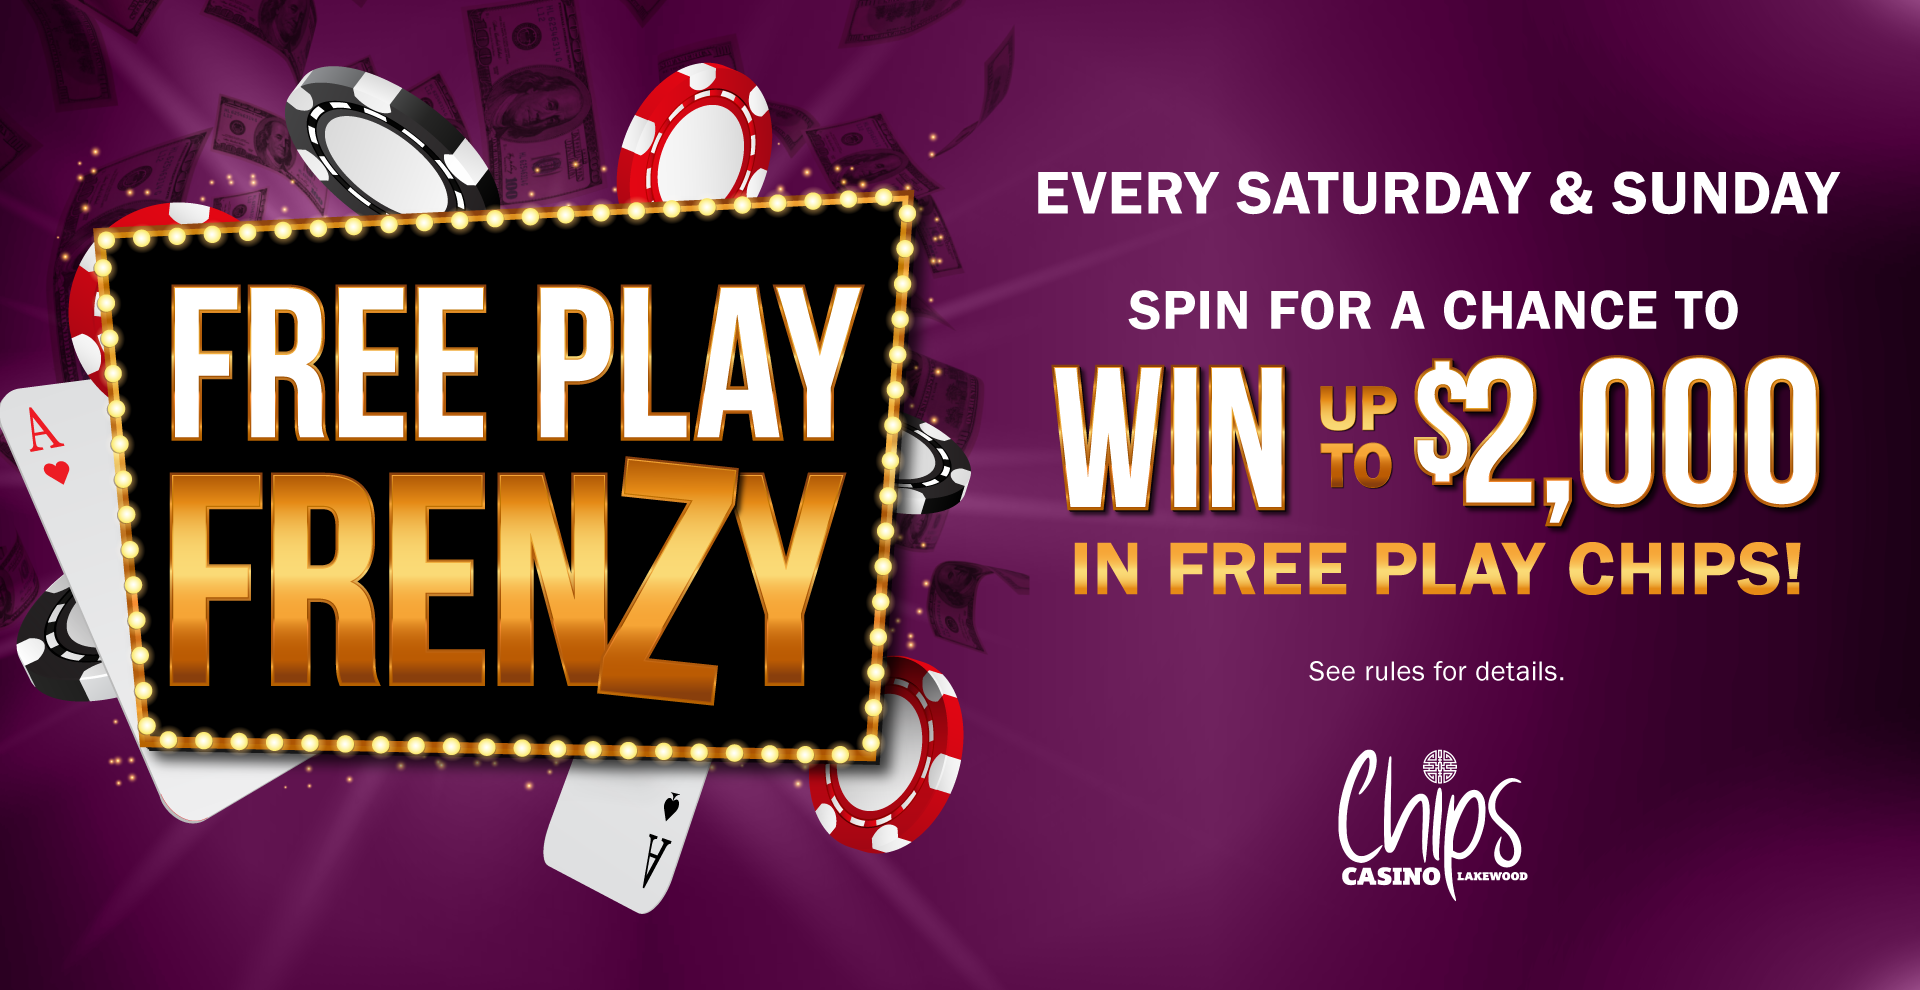 Chips Casino Lakewood | Free Play Frenzy